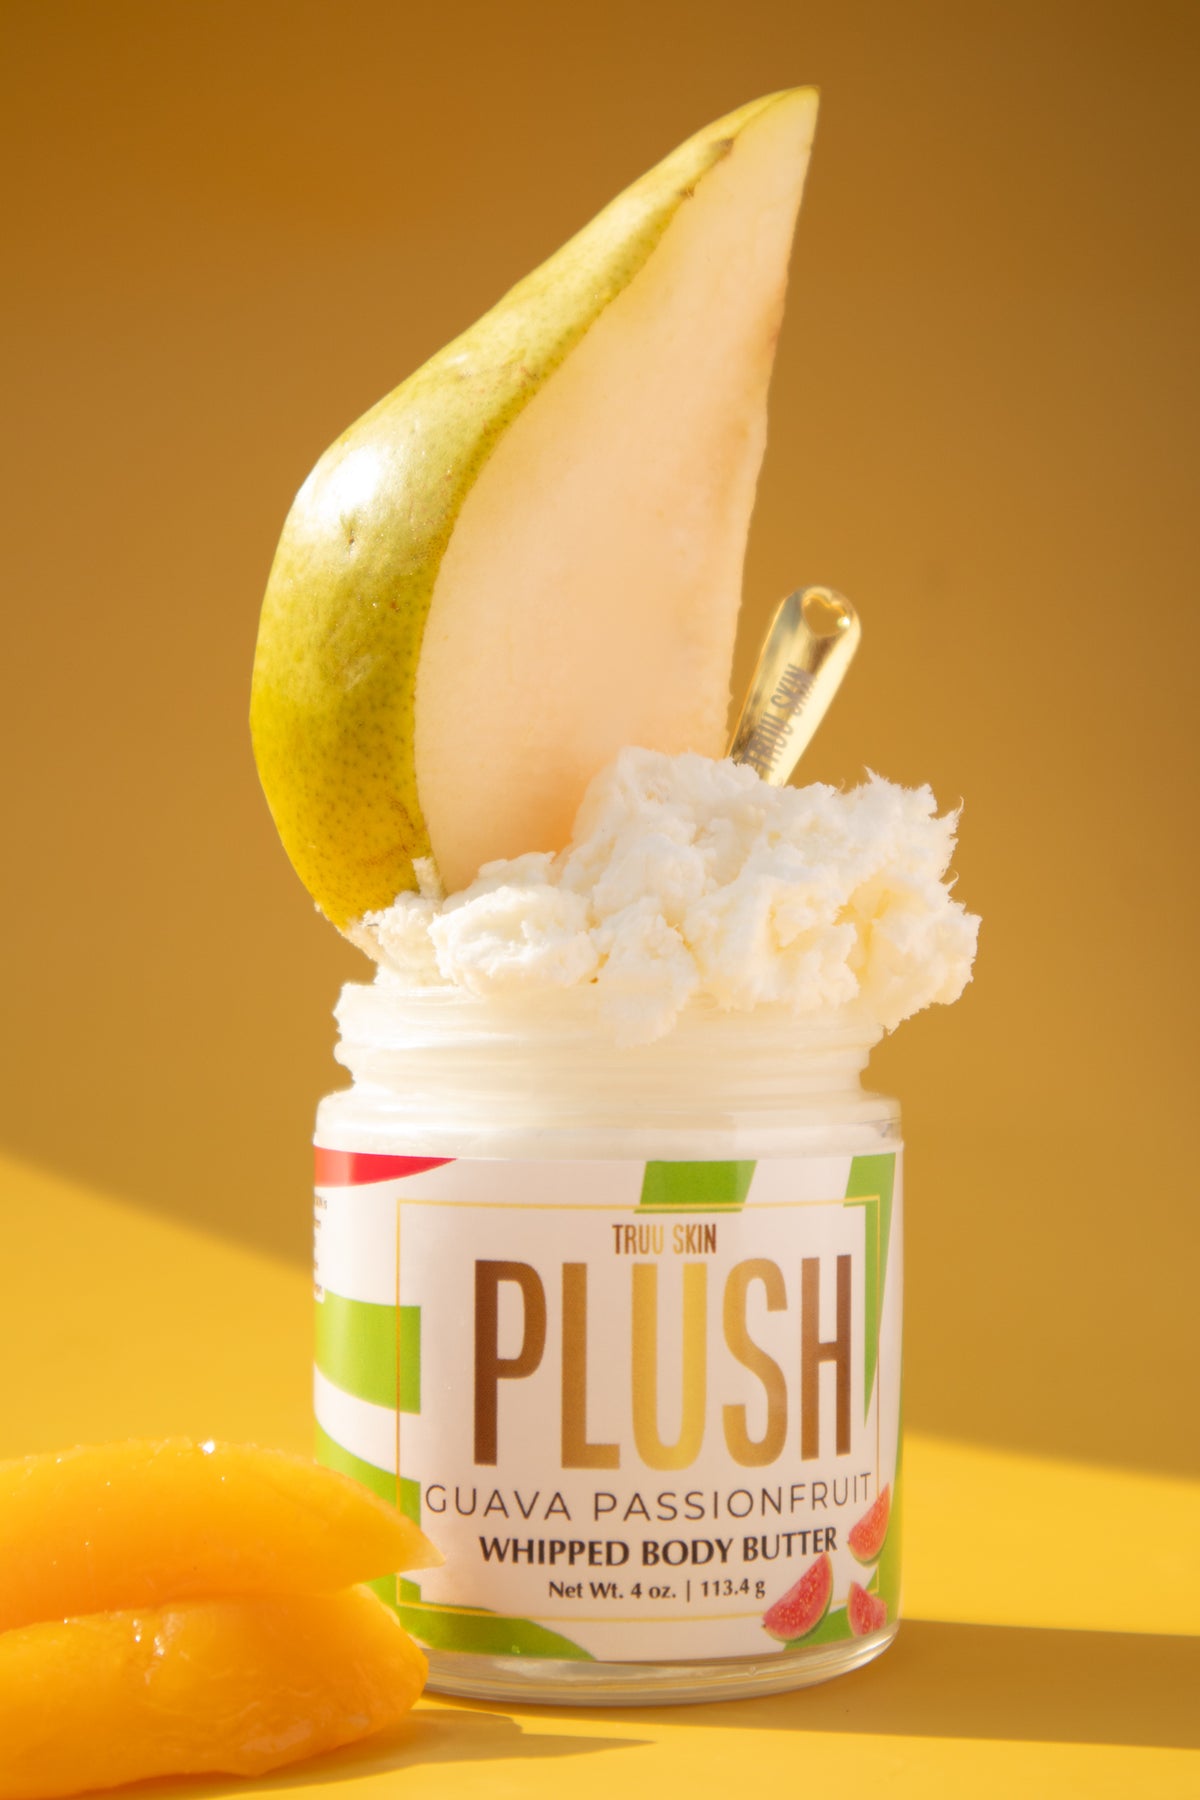 NEW! PLUSH Guava Passionfruit Whipped Body Butter